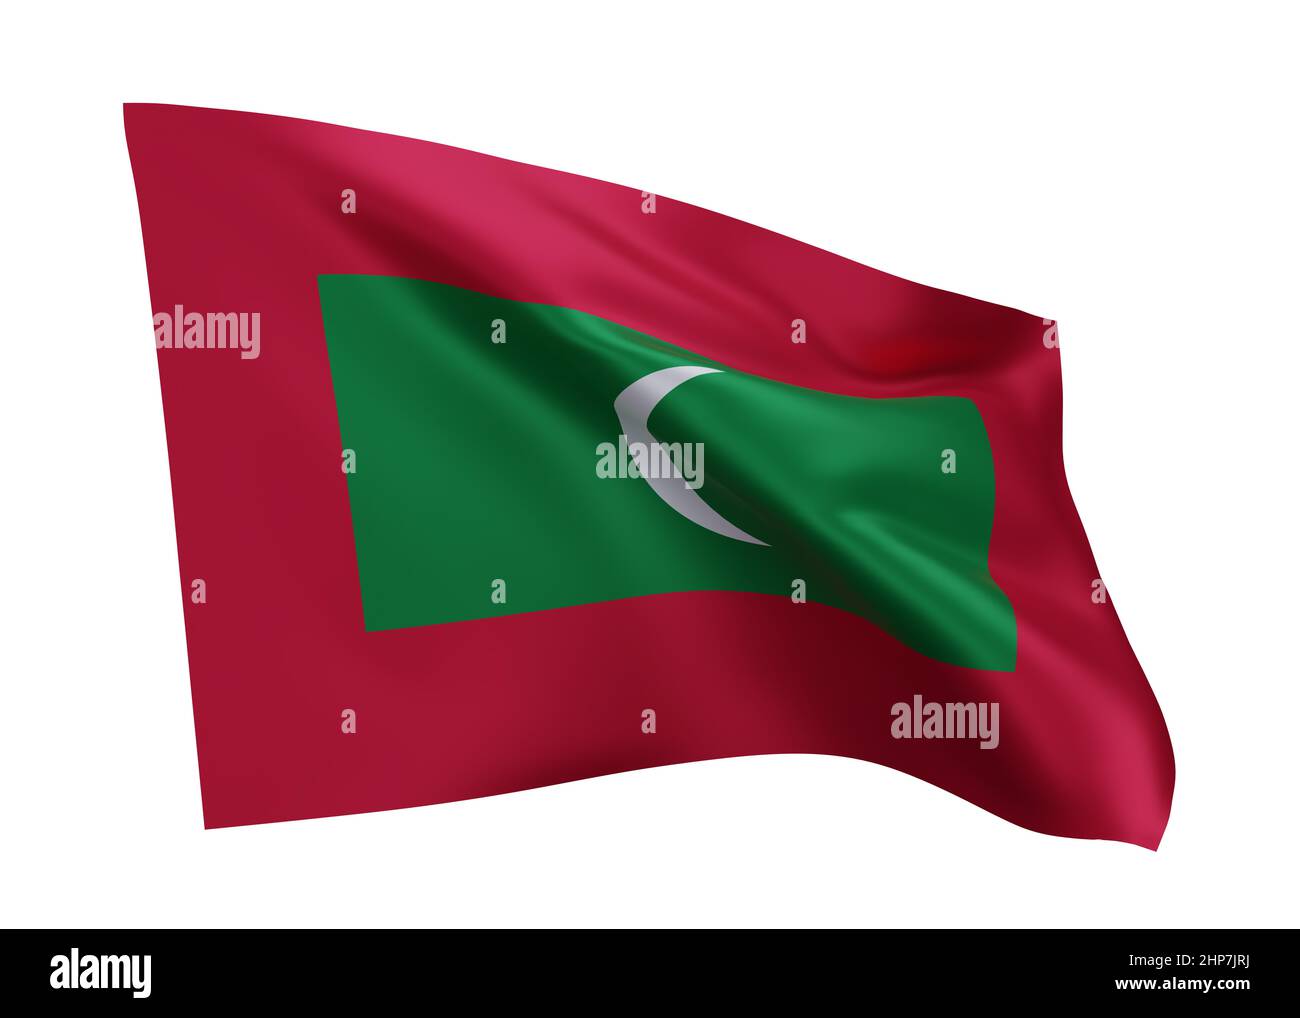 3d illustration flag of Republic of Maldives . Maldivian high resolution flag isolated against white background. 3d rendering Stock Photo